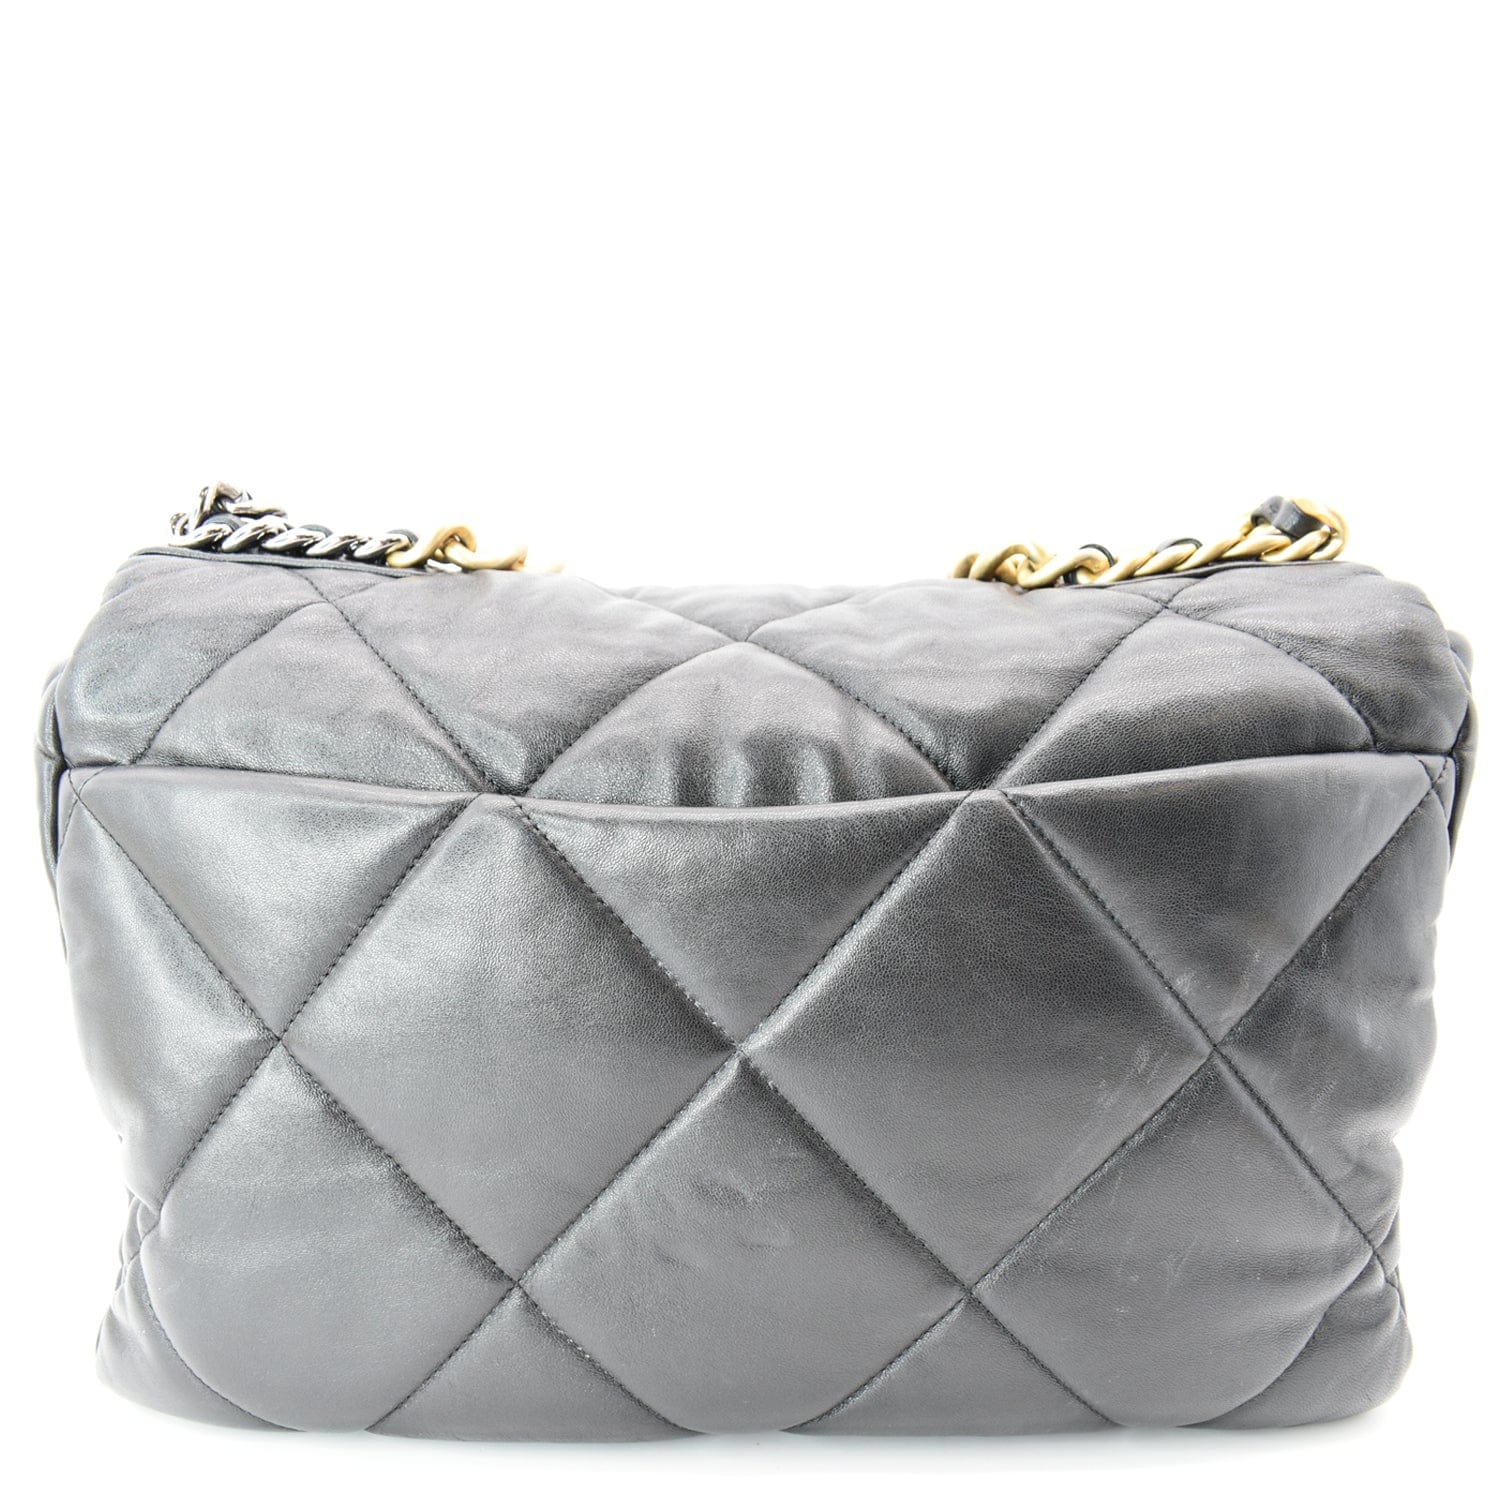 Chanel 19 Large Gray Leather Handbag available now!